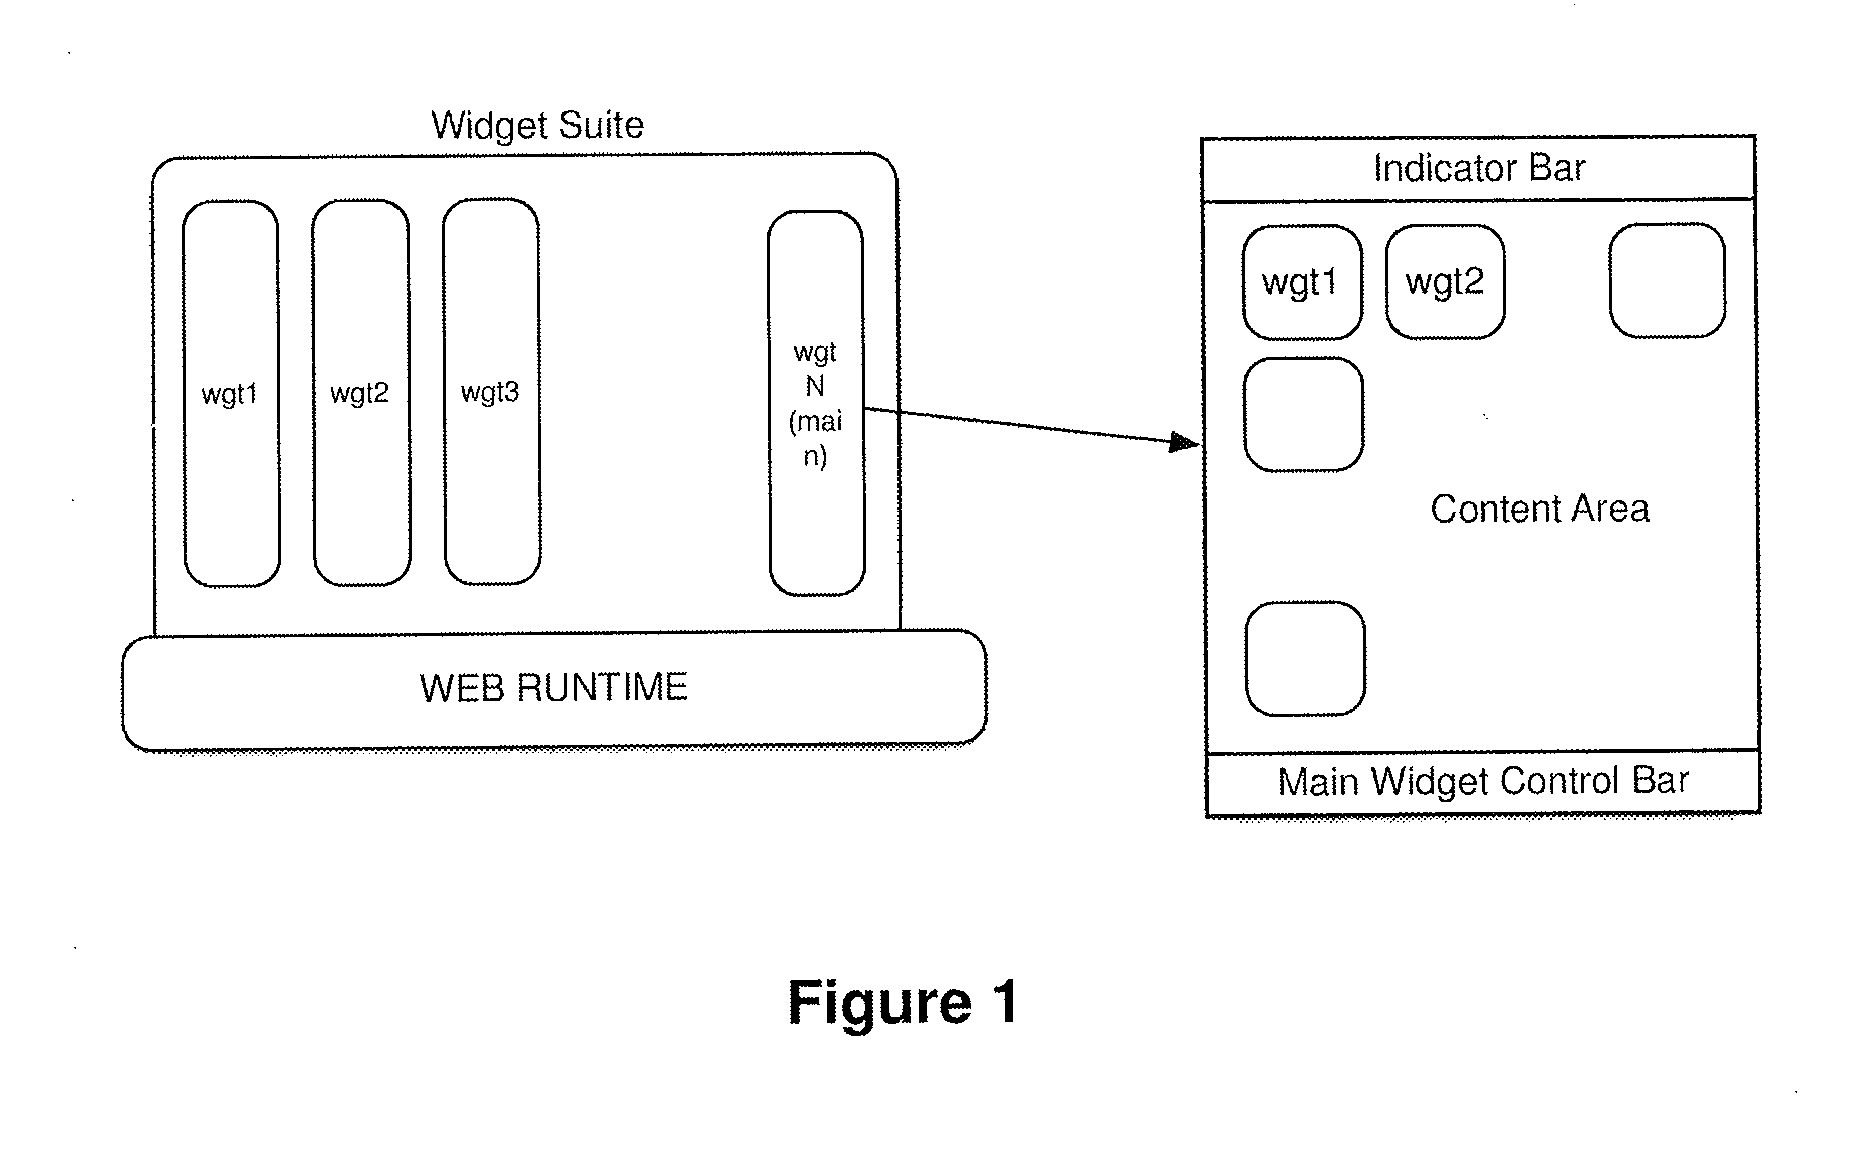 Method for managing widgets in an electronic device to improve the user experience of the device